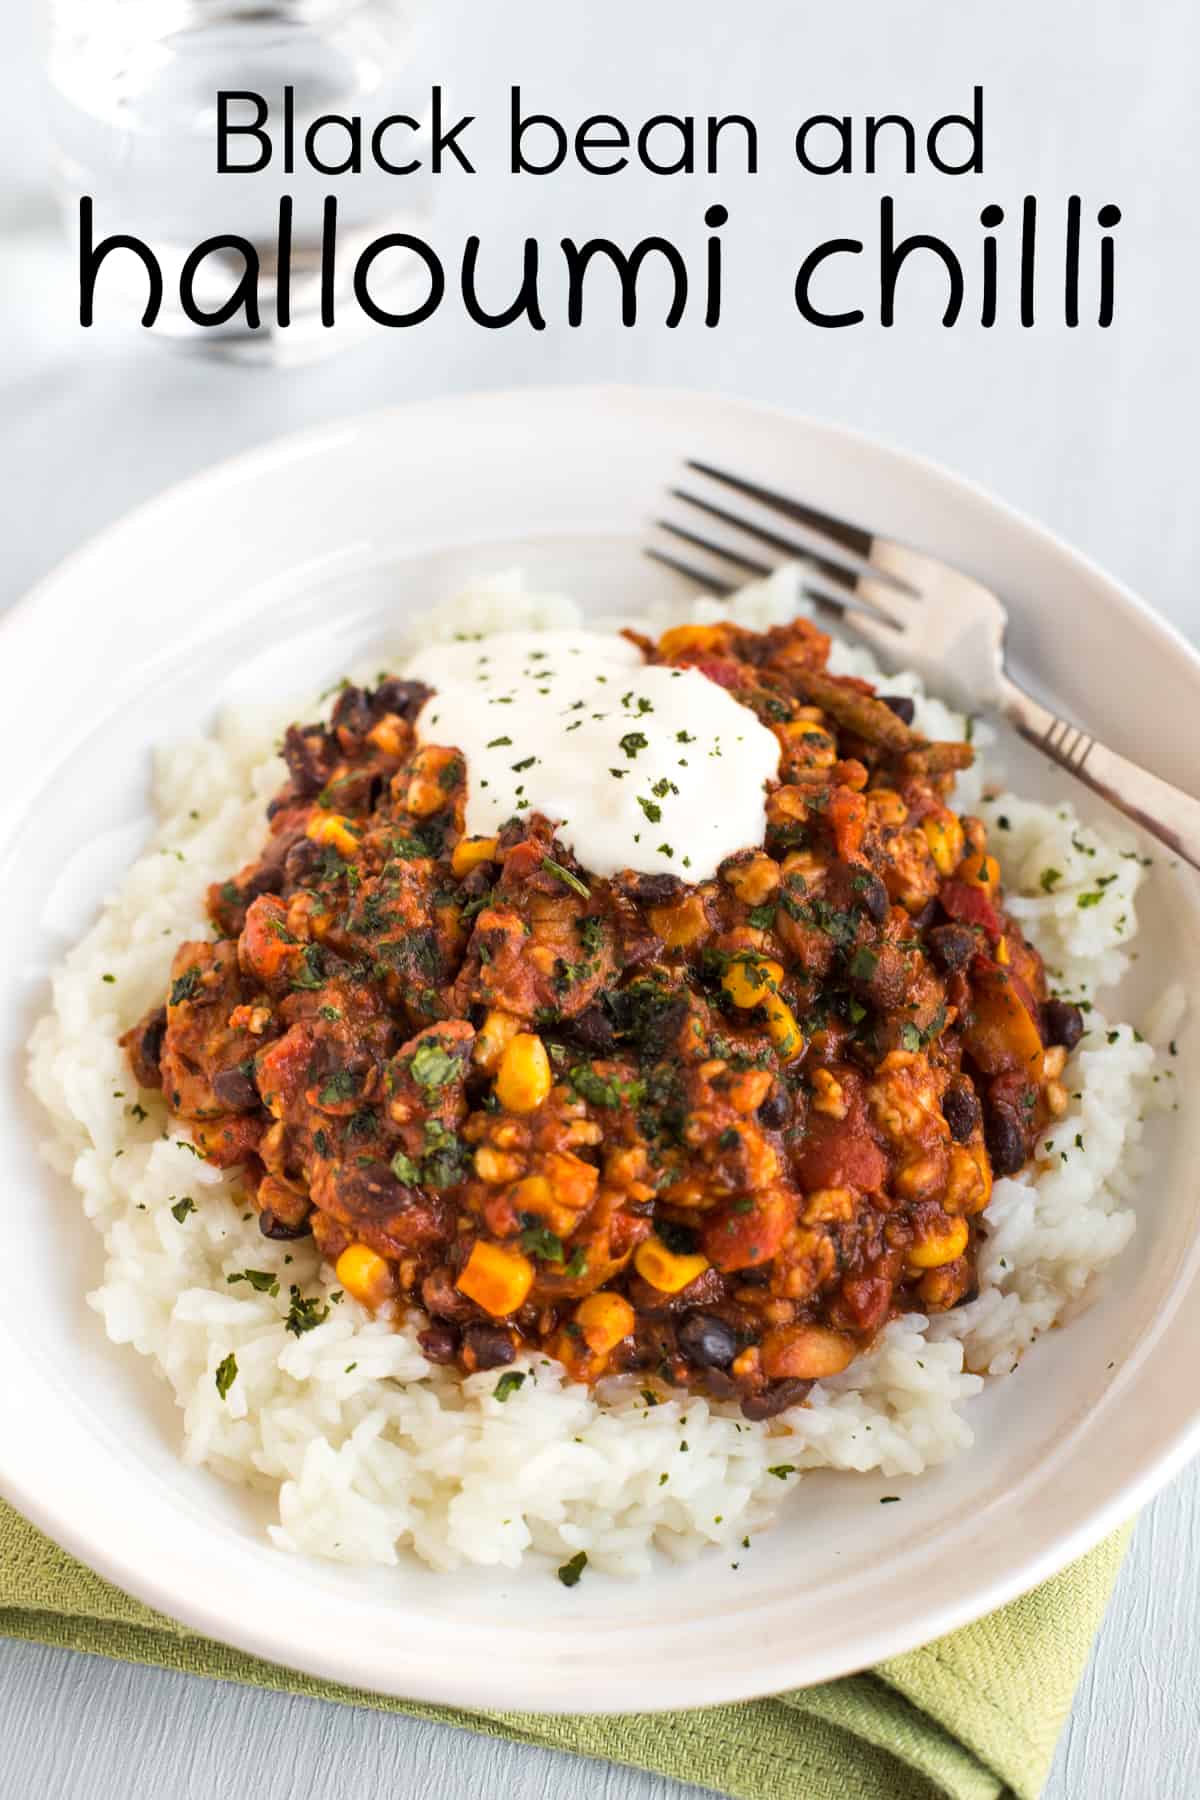 A portion of halloumi chilli in a bowl with rice and sour cream.